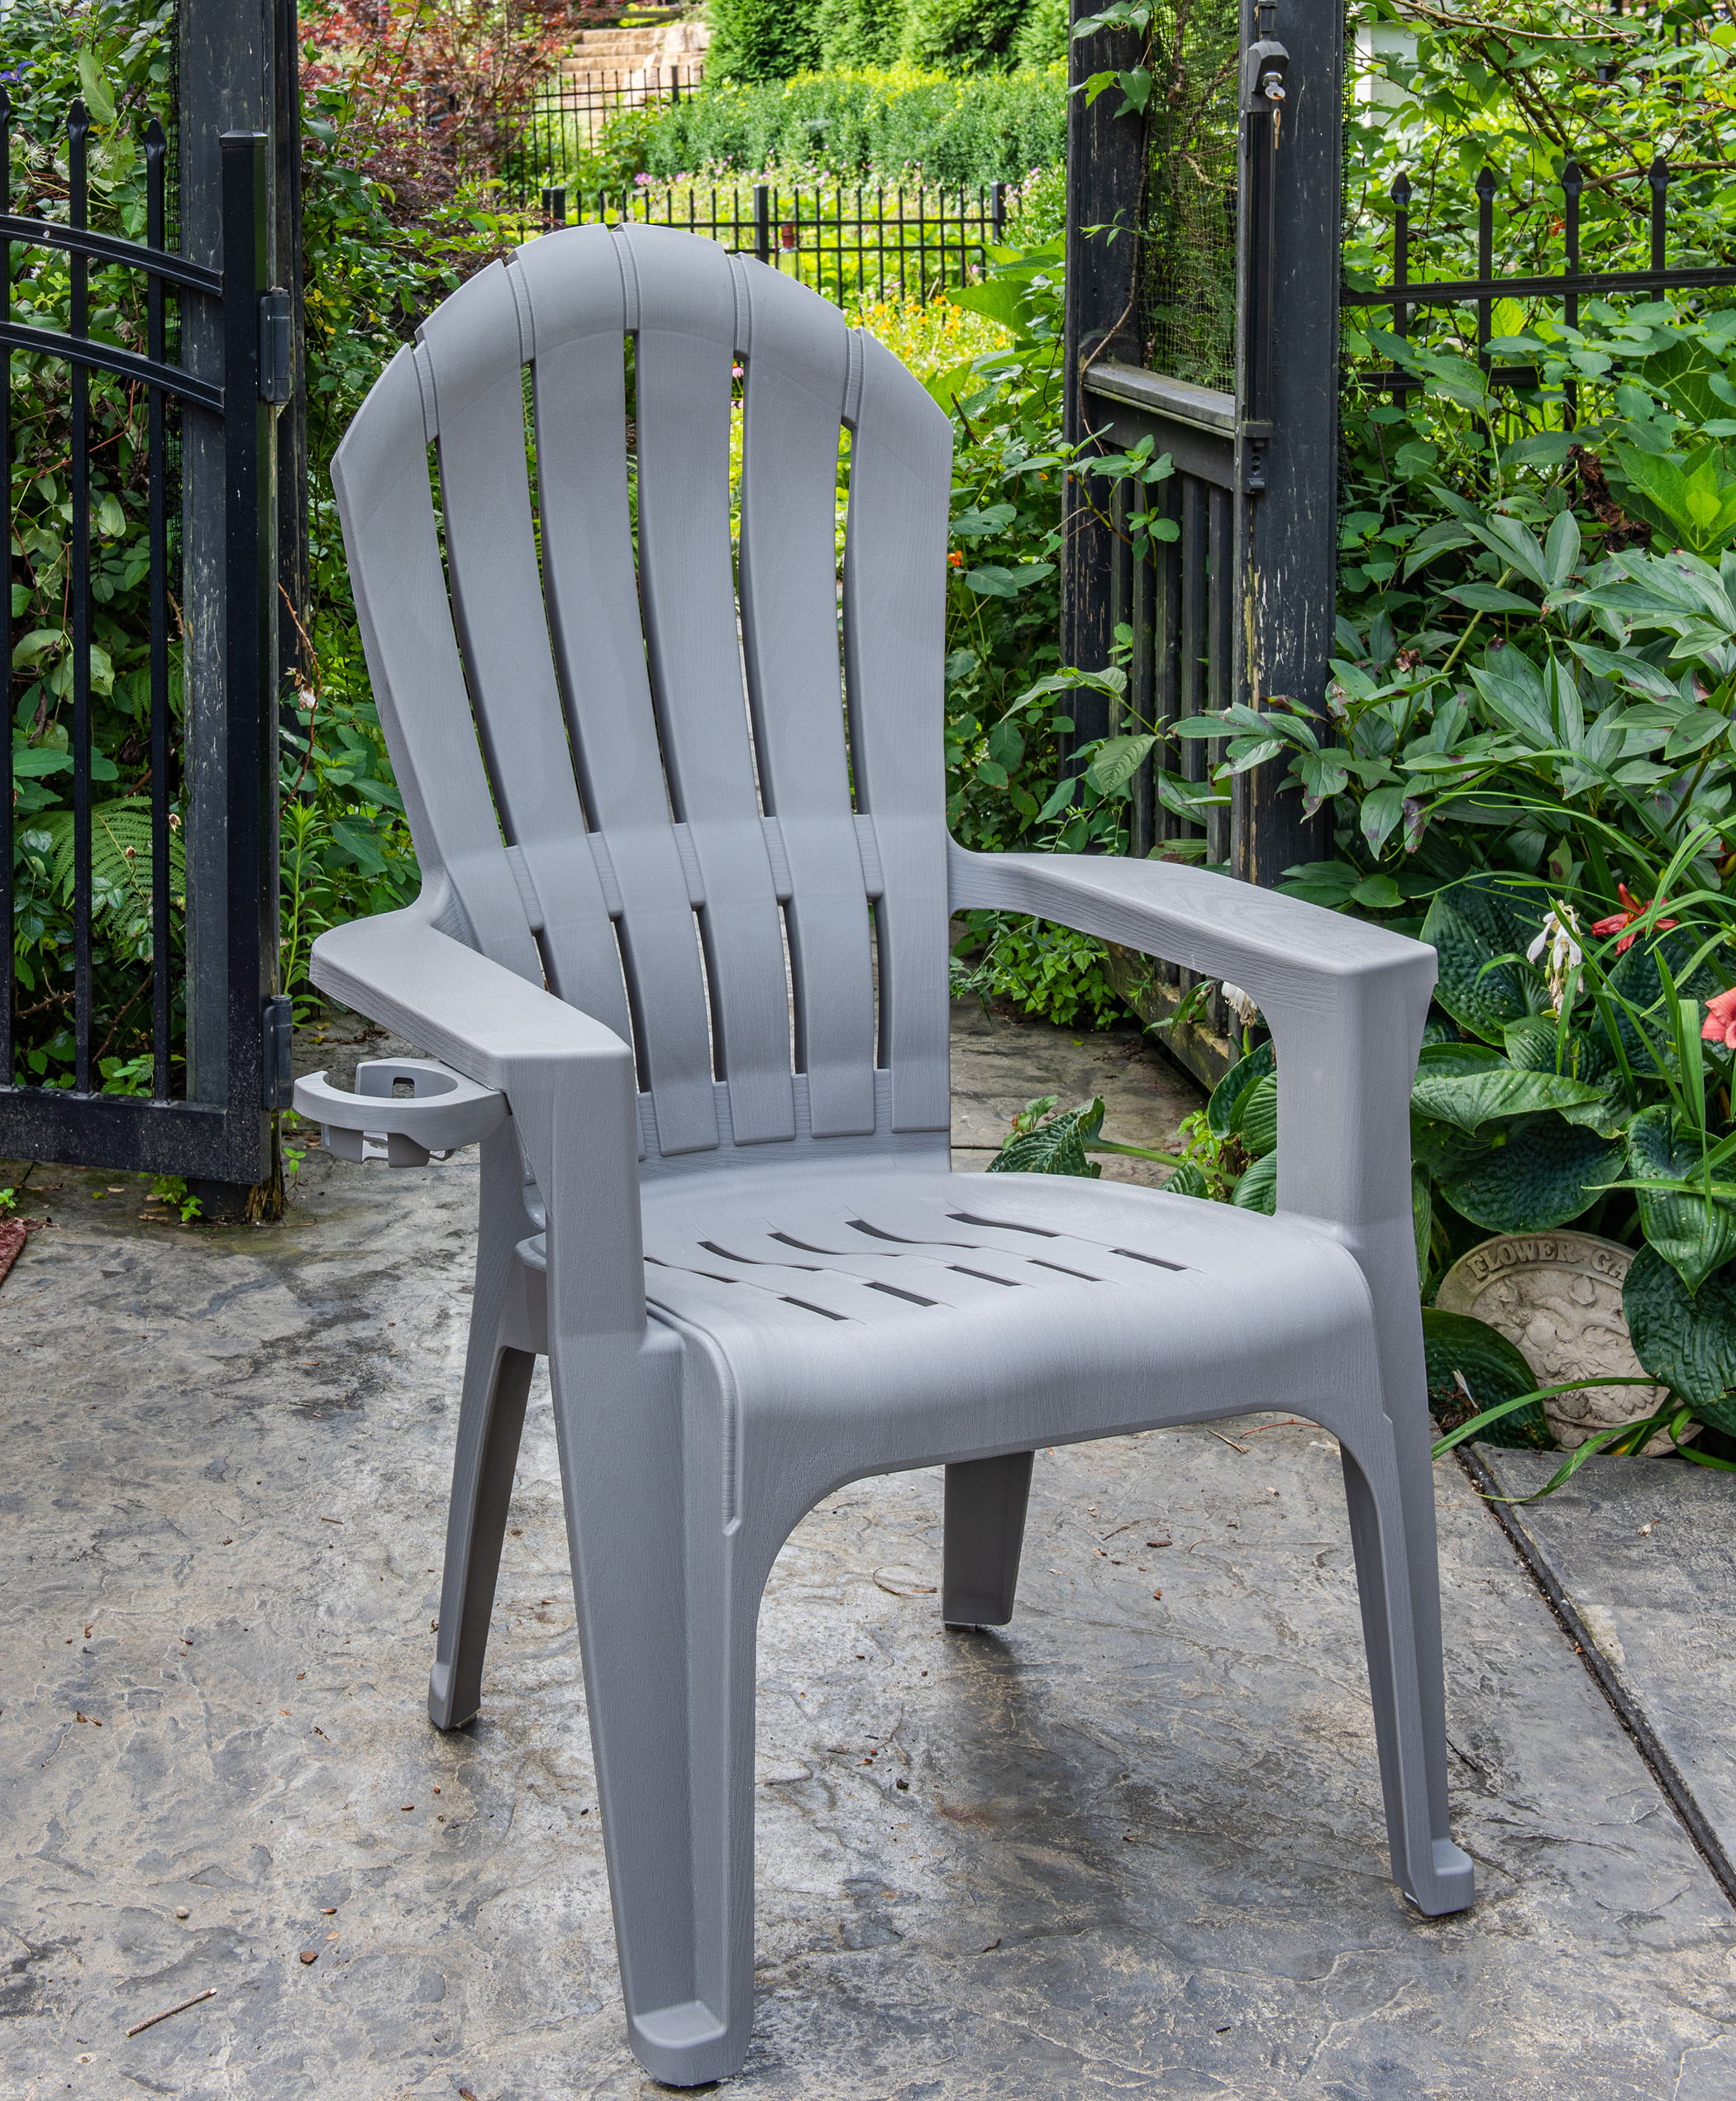 Adams Big Easy Outdoor Resin Adirondack Chair with Cup